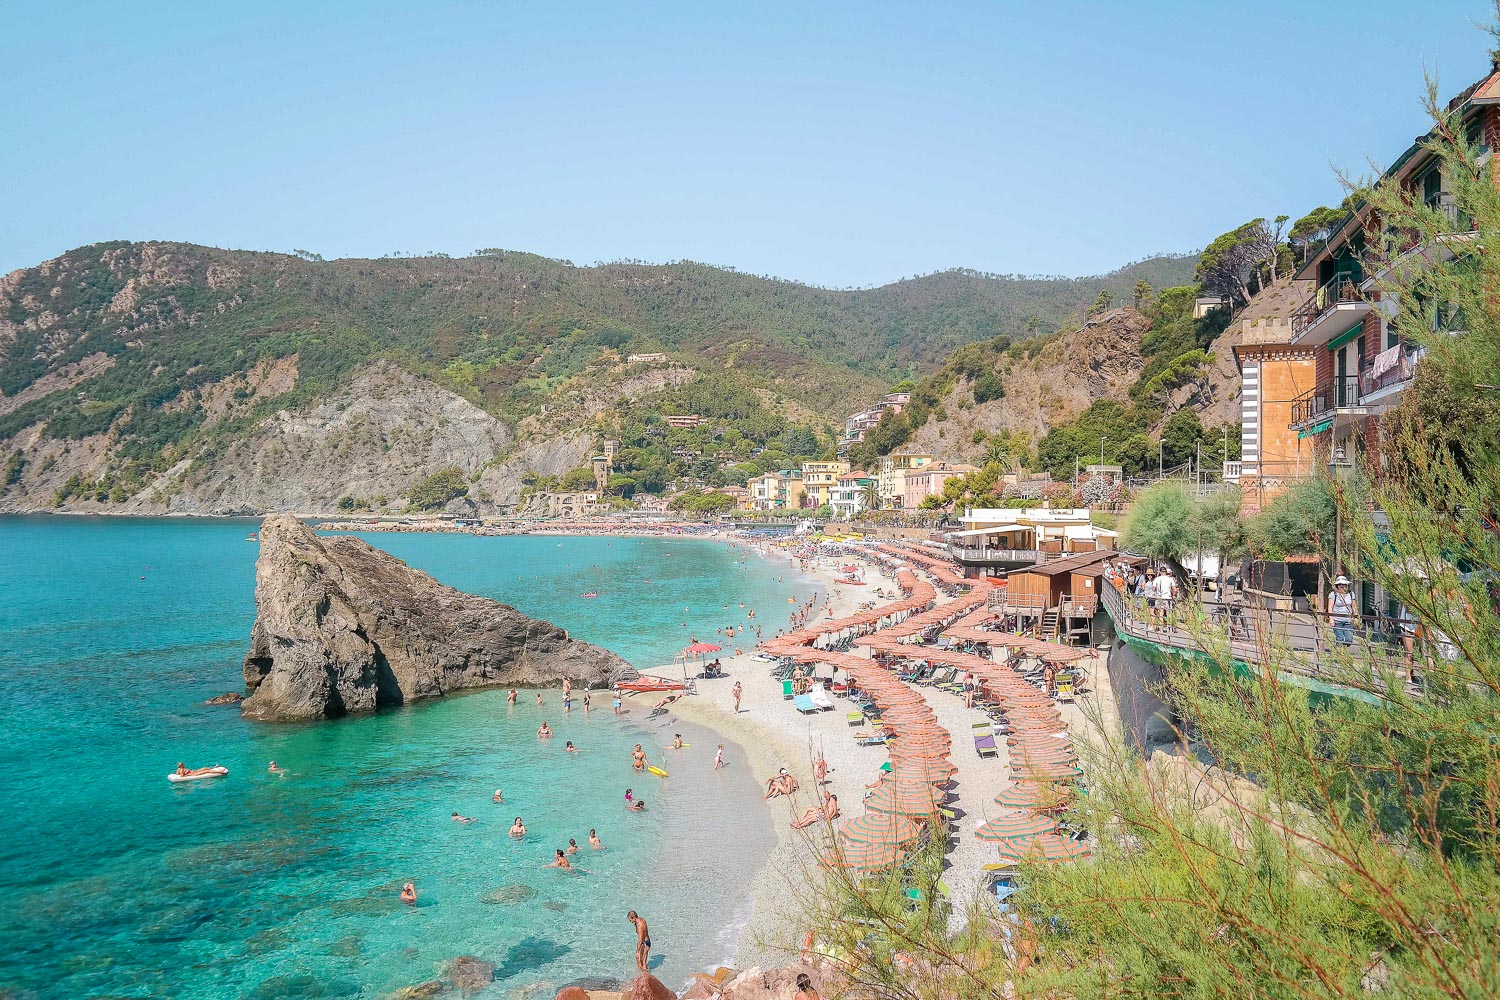 Monterosso, home to the best beach in Cinque Terre